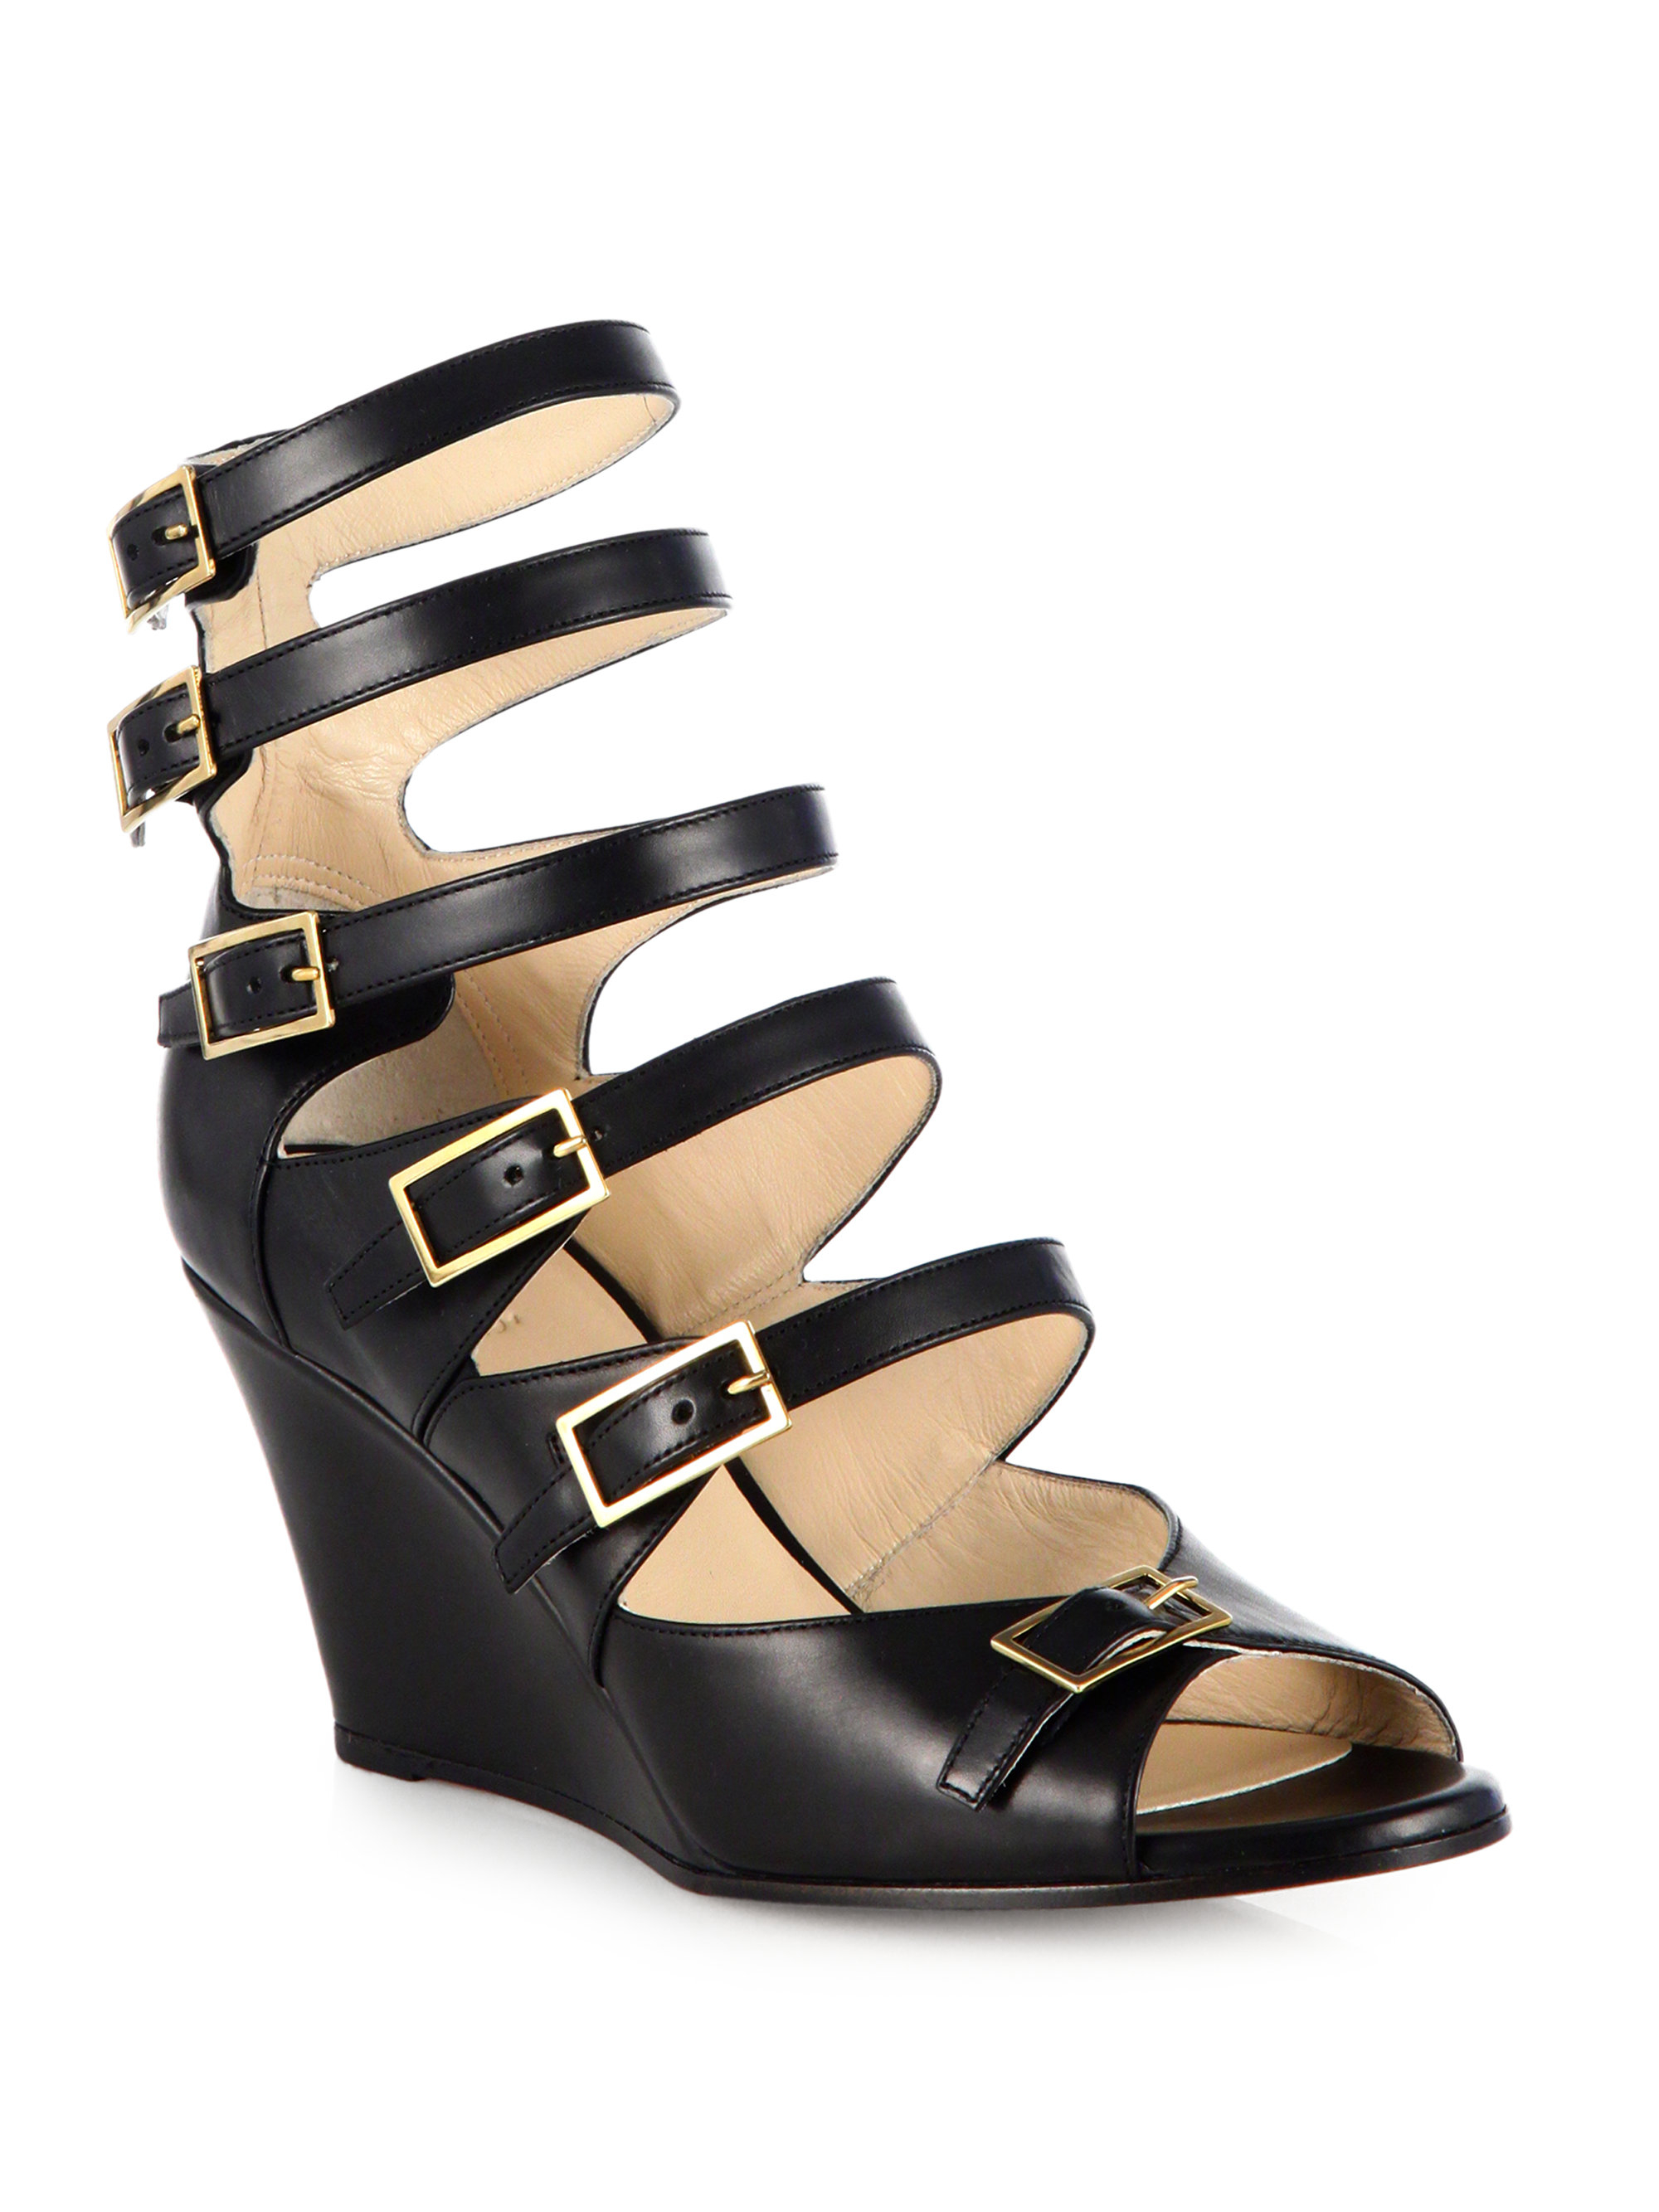 Chloé Strappy Leather Wedge Sandals in Black | Lyst